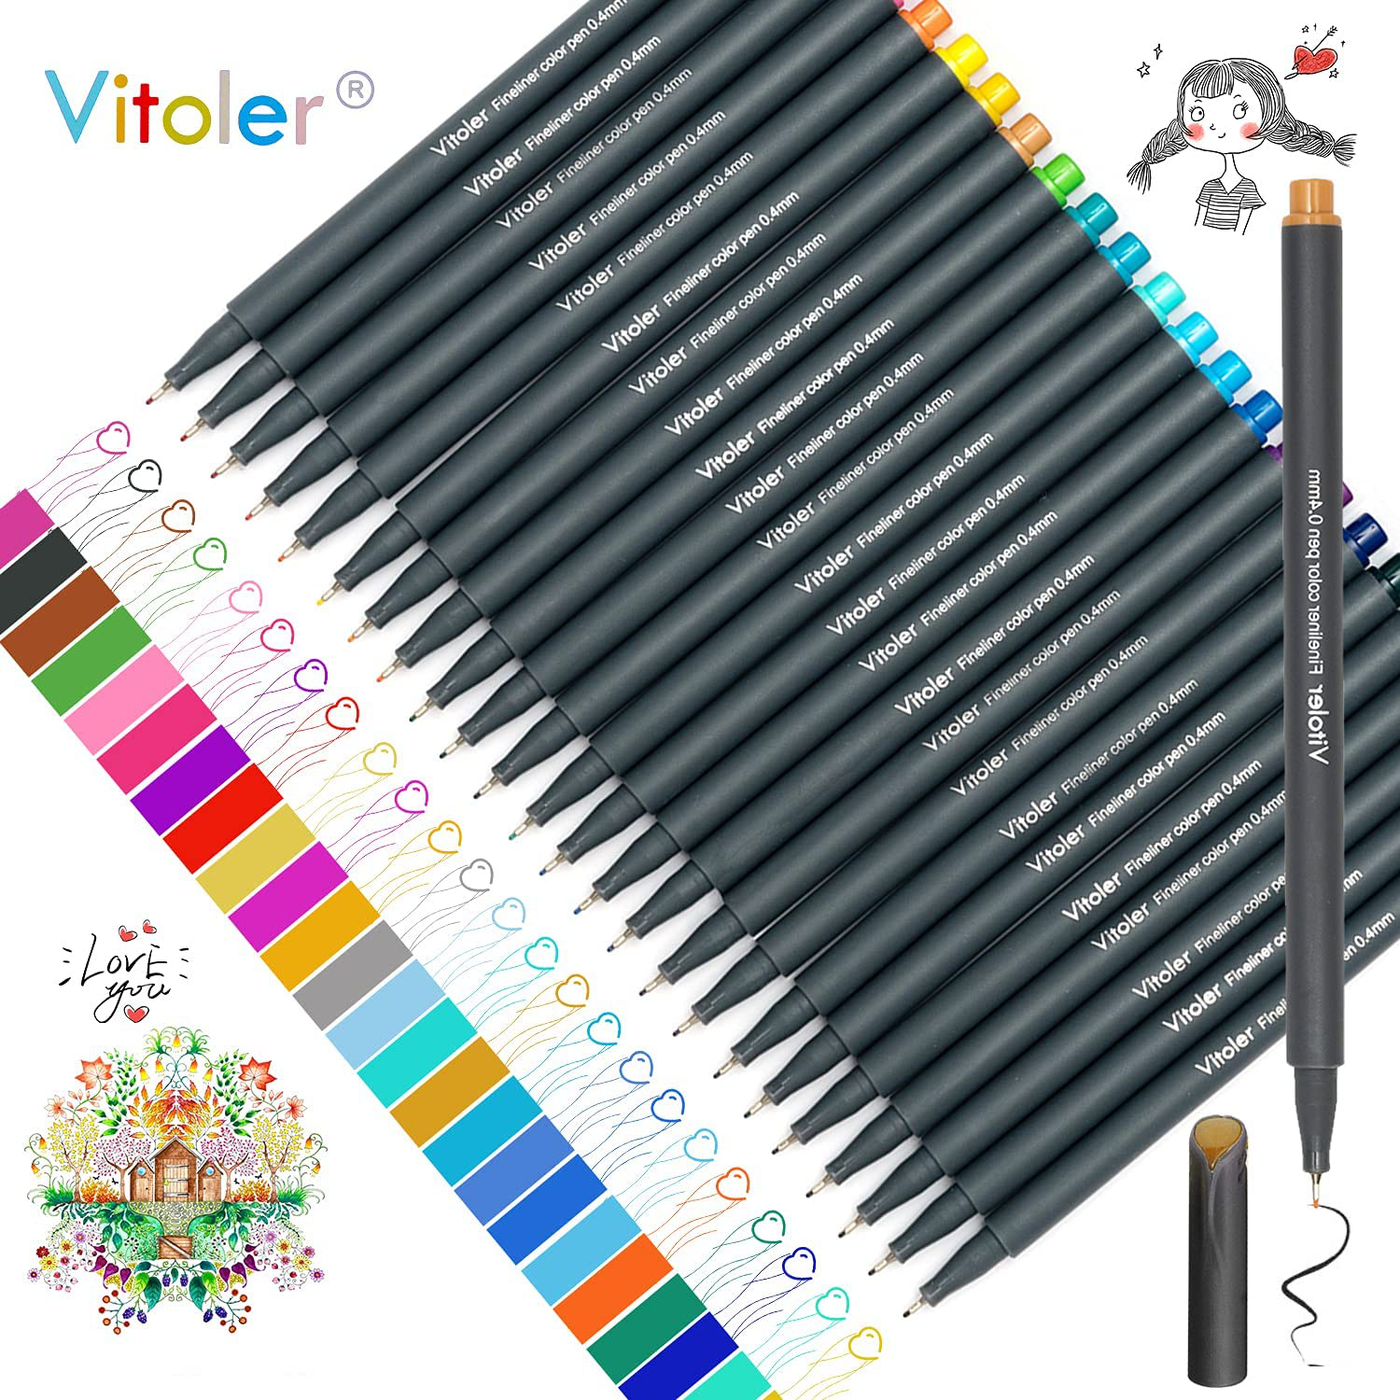 VITOLER Colored Journaling Pens, Fine Line Point Drawing Marker Pens for Writing Journaling Planner Coloring Book Sketching Taking Note Calendar Art Projects Office School Supplies (24 Colors)